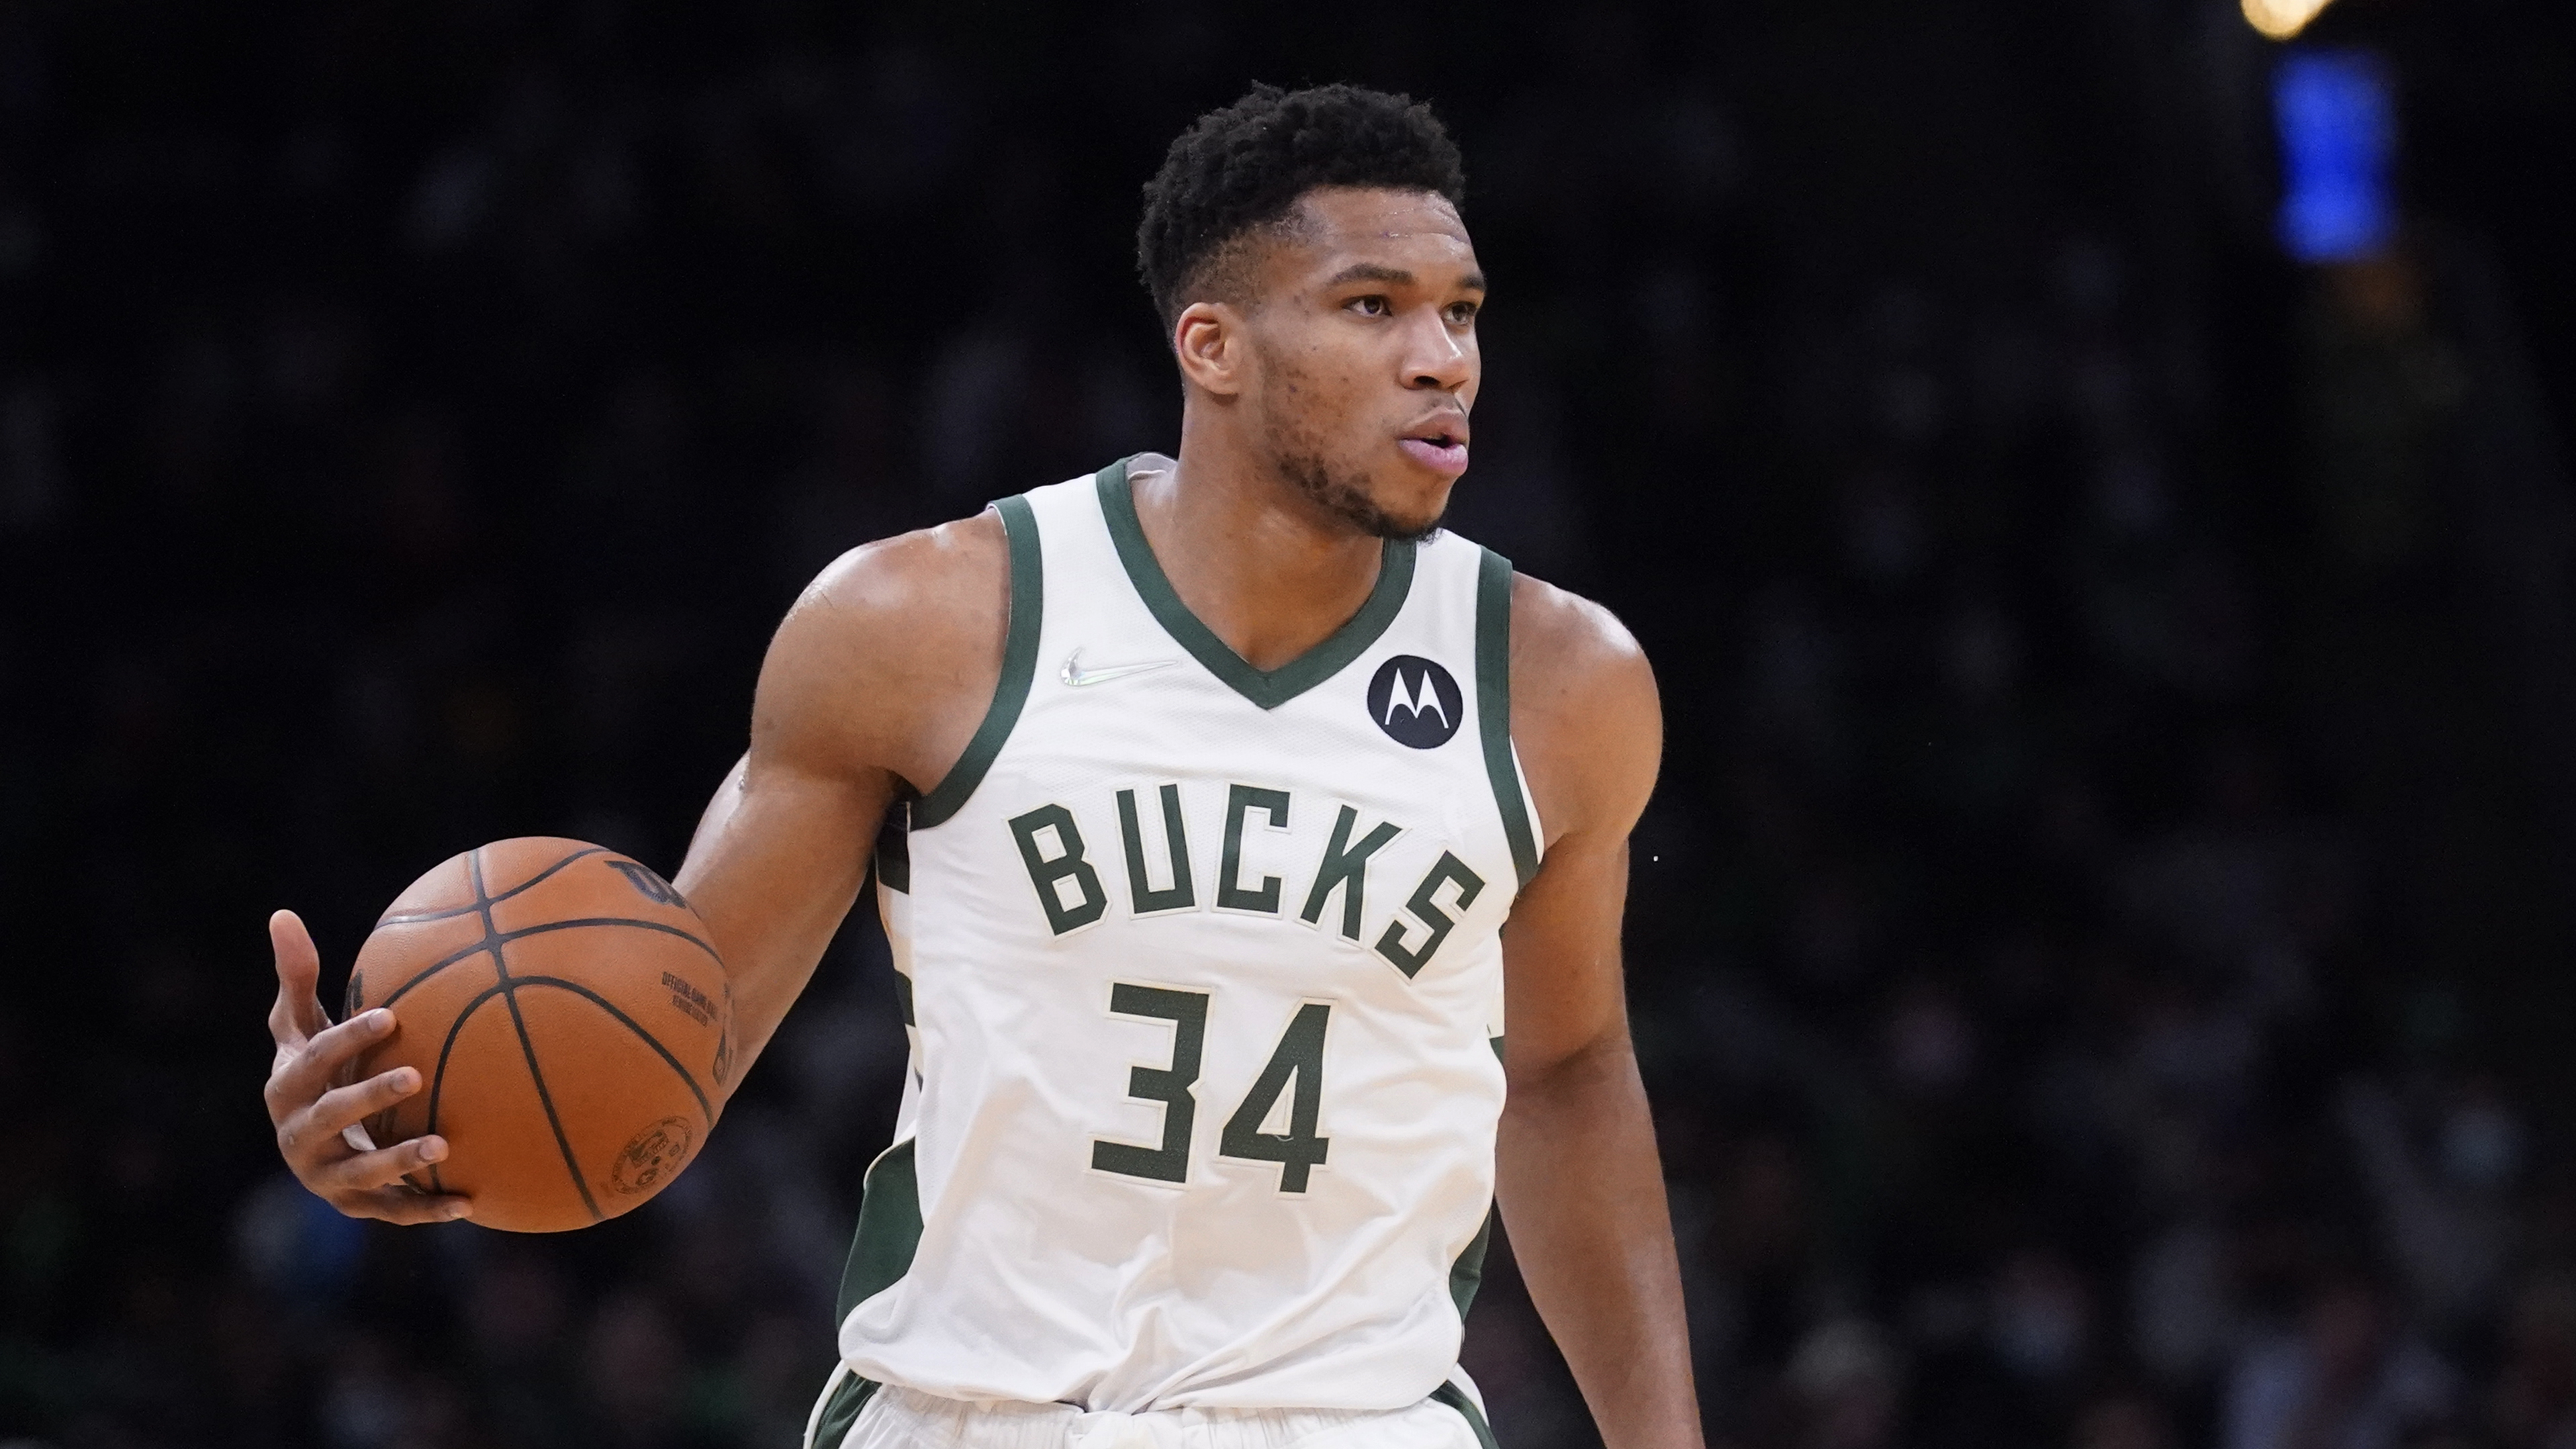 Bucks' Giannis Antetokounmpo Enters Health and Safety Protocols, Out vs. Pacers